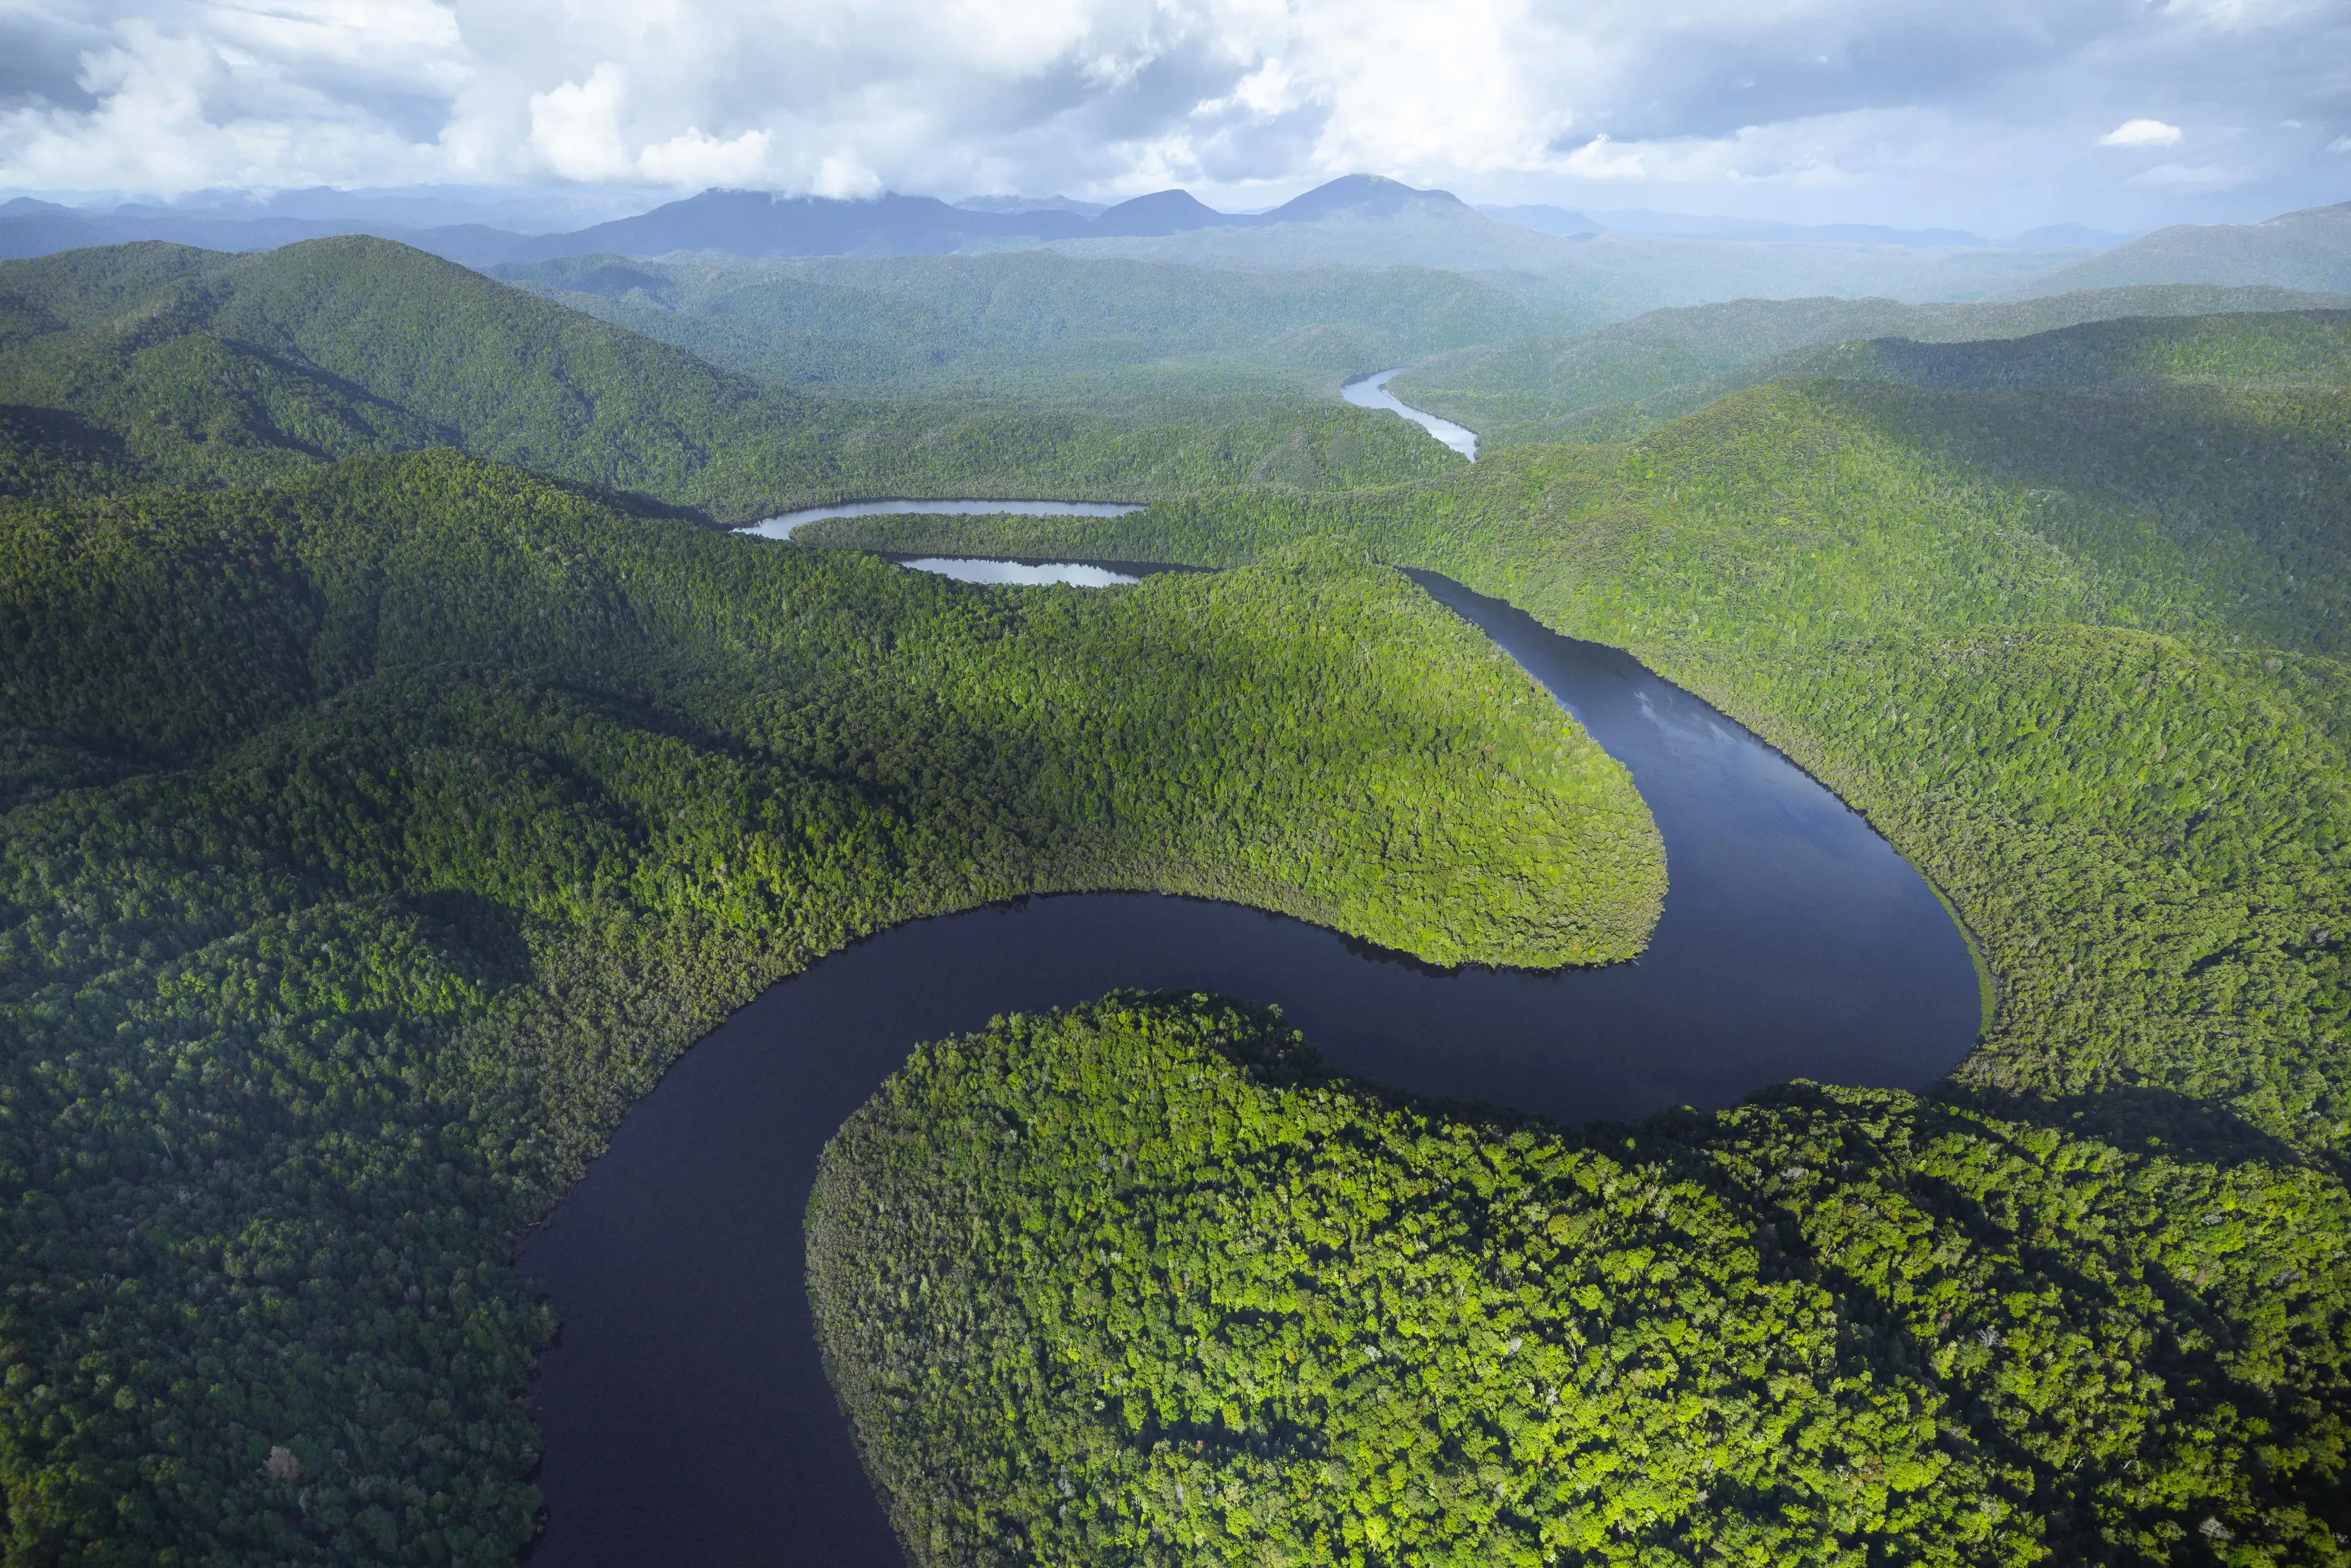 Breathtaking aerial shot of the Gordon river weaving through hills and vibrant green forests.